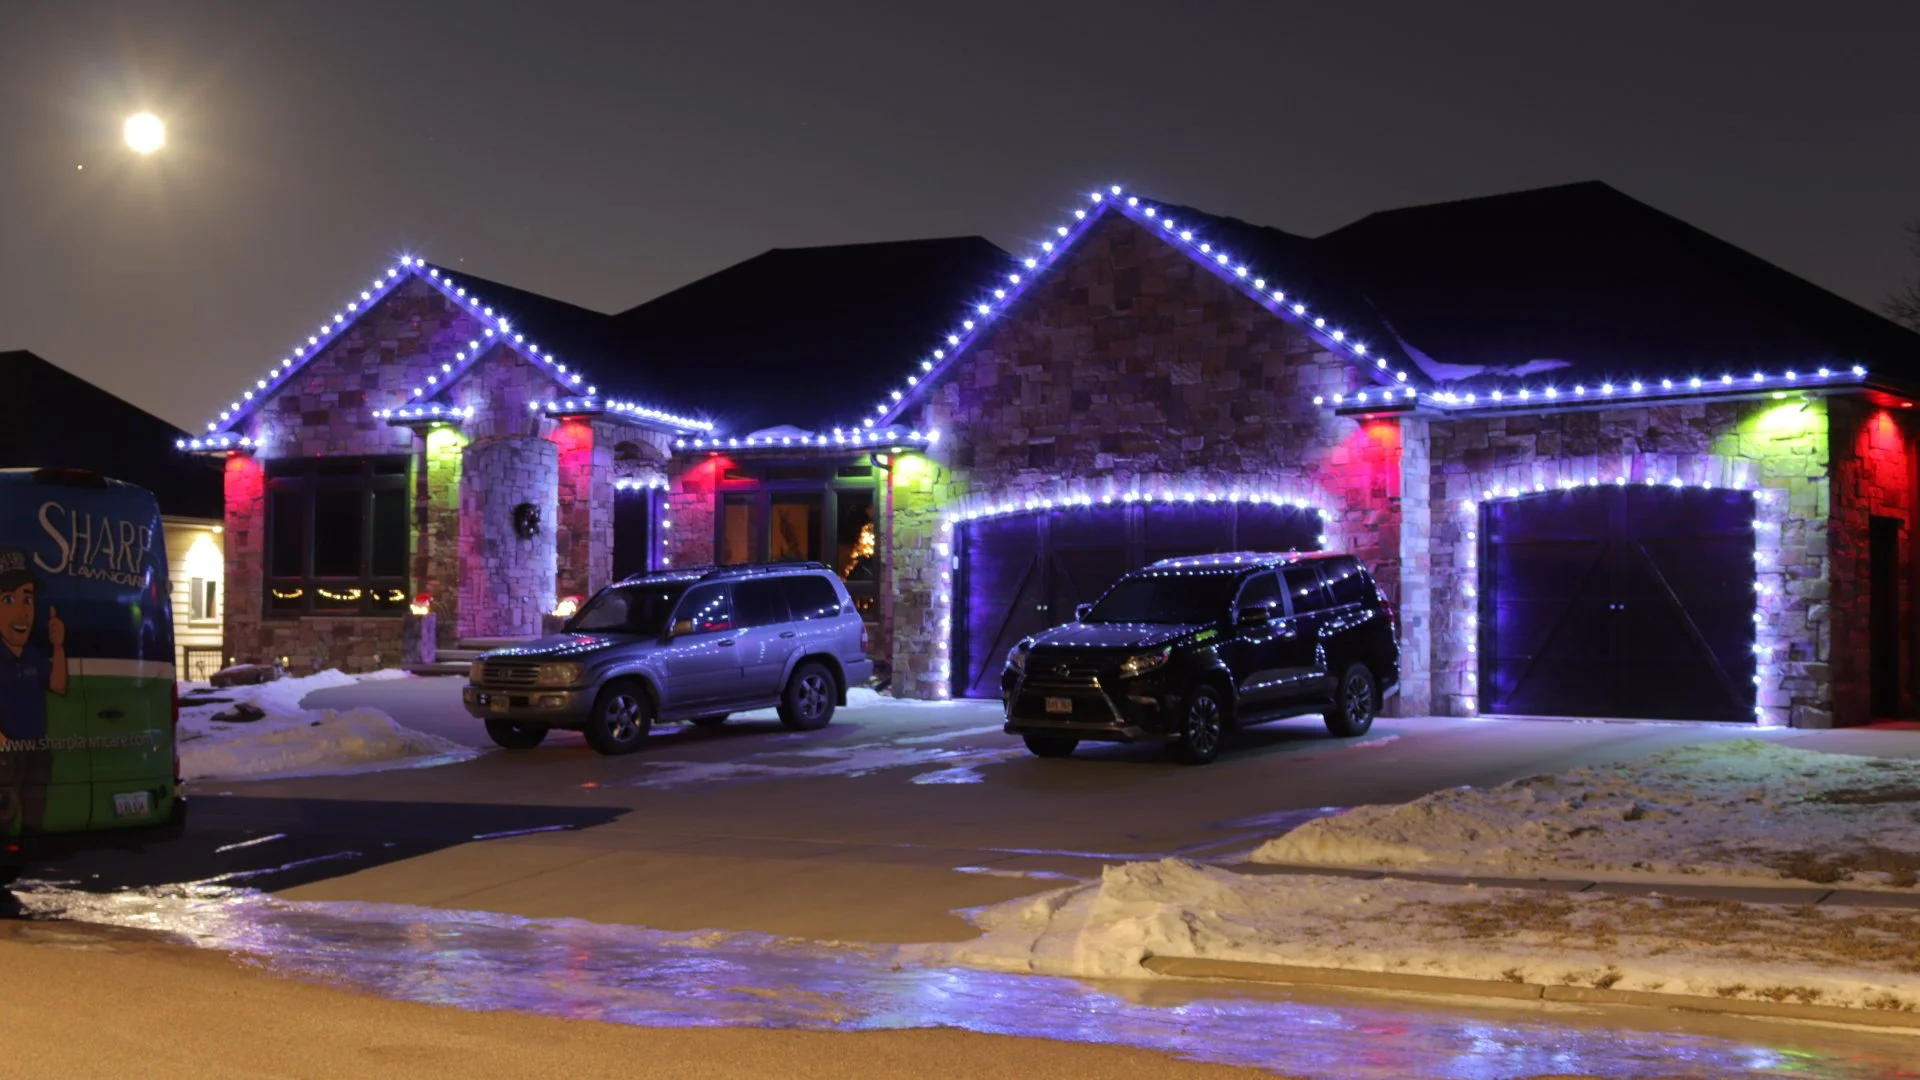 What to Expect When Hiring Pros to Install Christmas Lights on Your Home